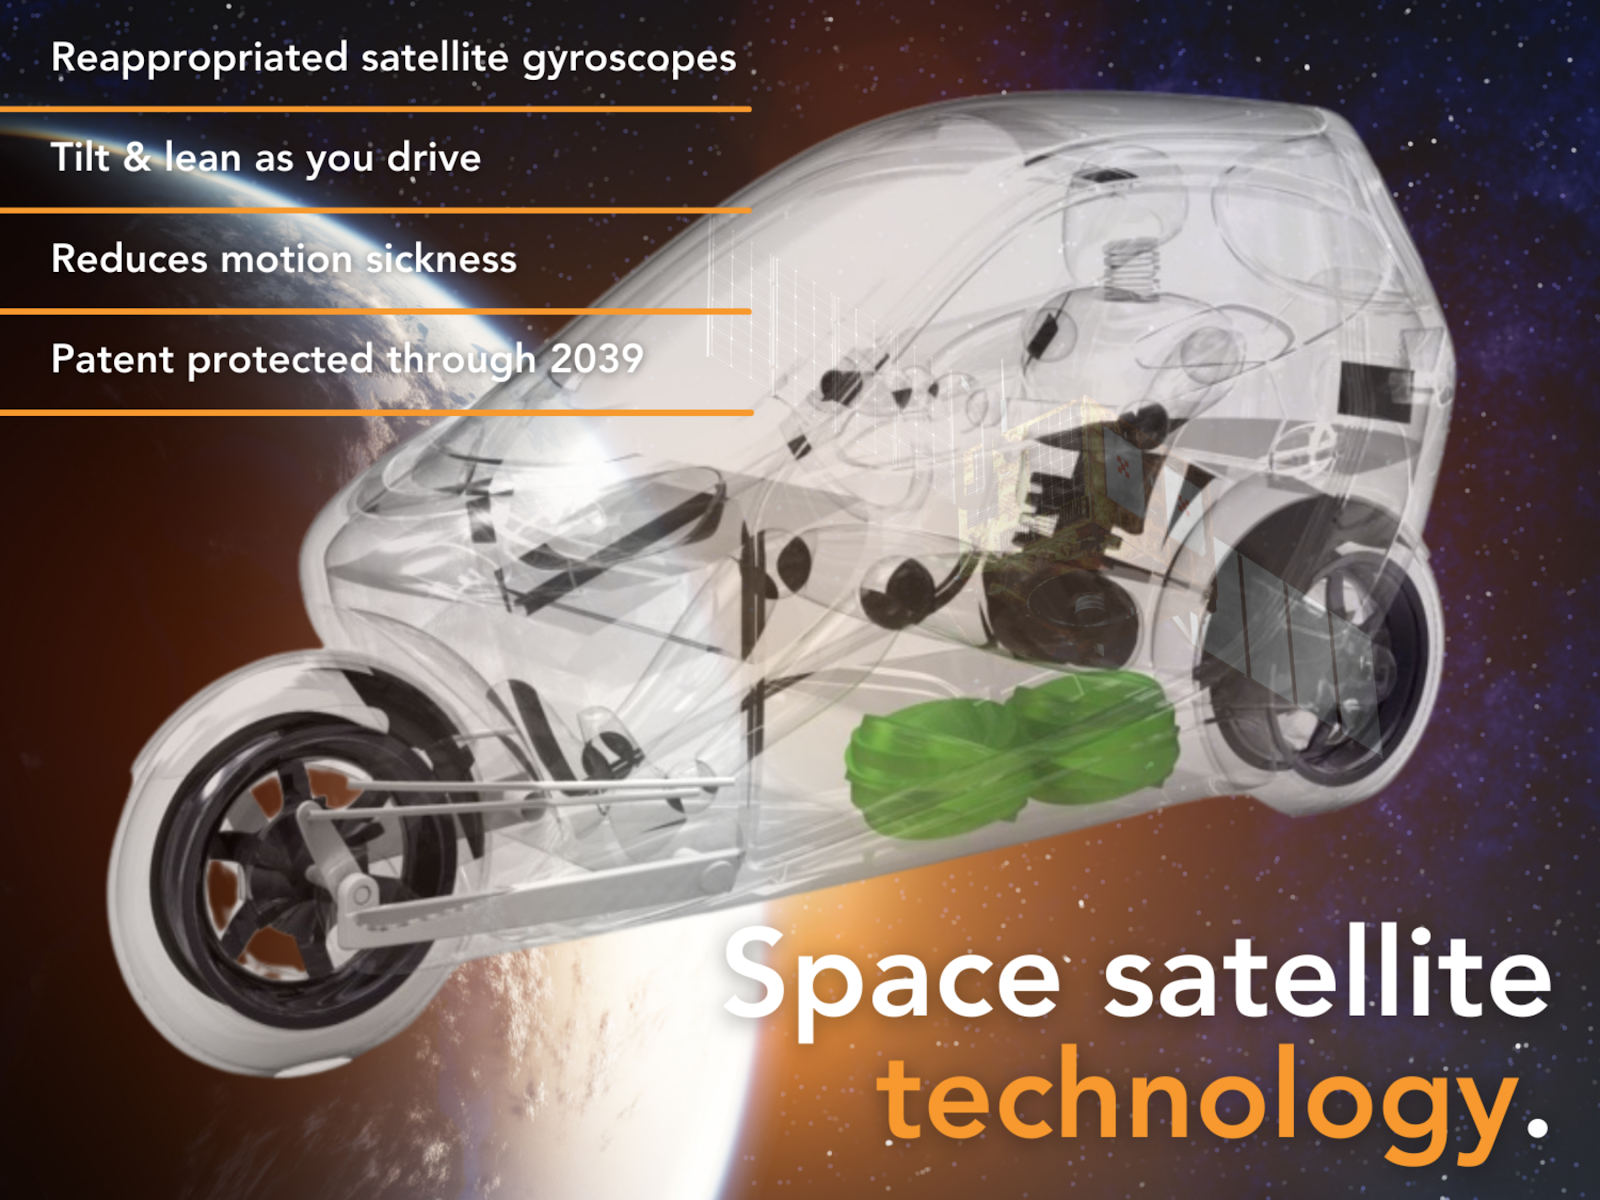 Space satellite technology. Photo of a see-through version of the AEV with gyroscopes highlighted in green, over a space background.